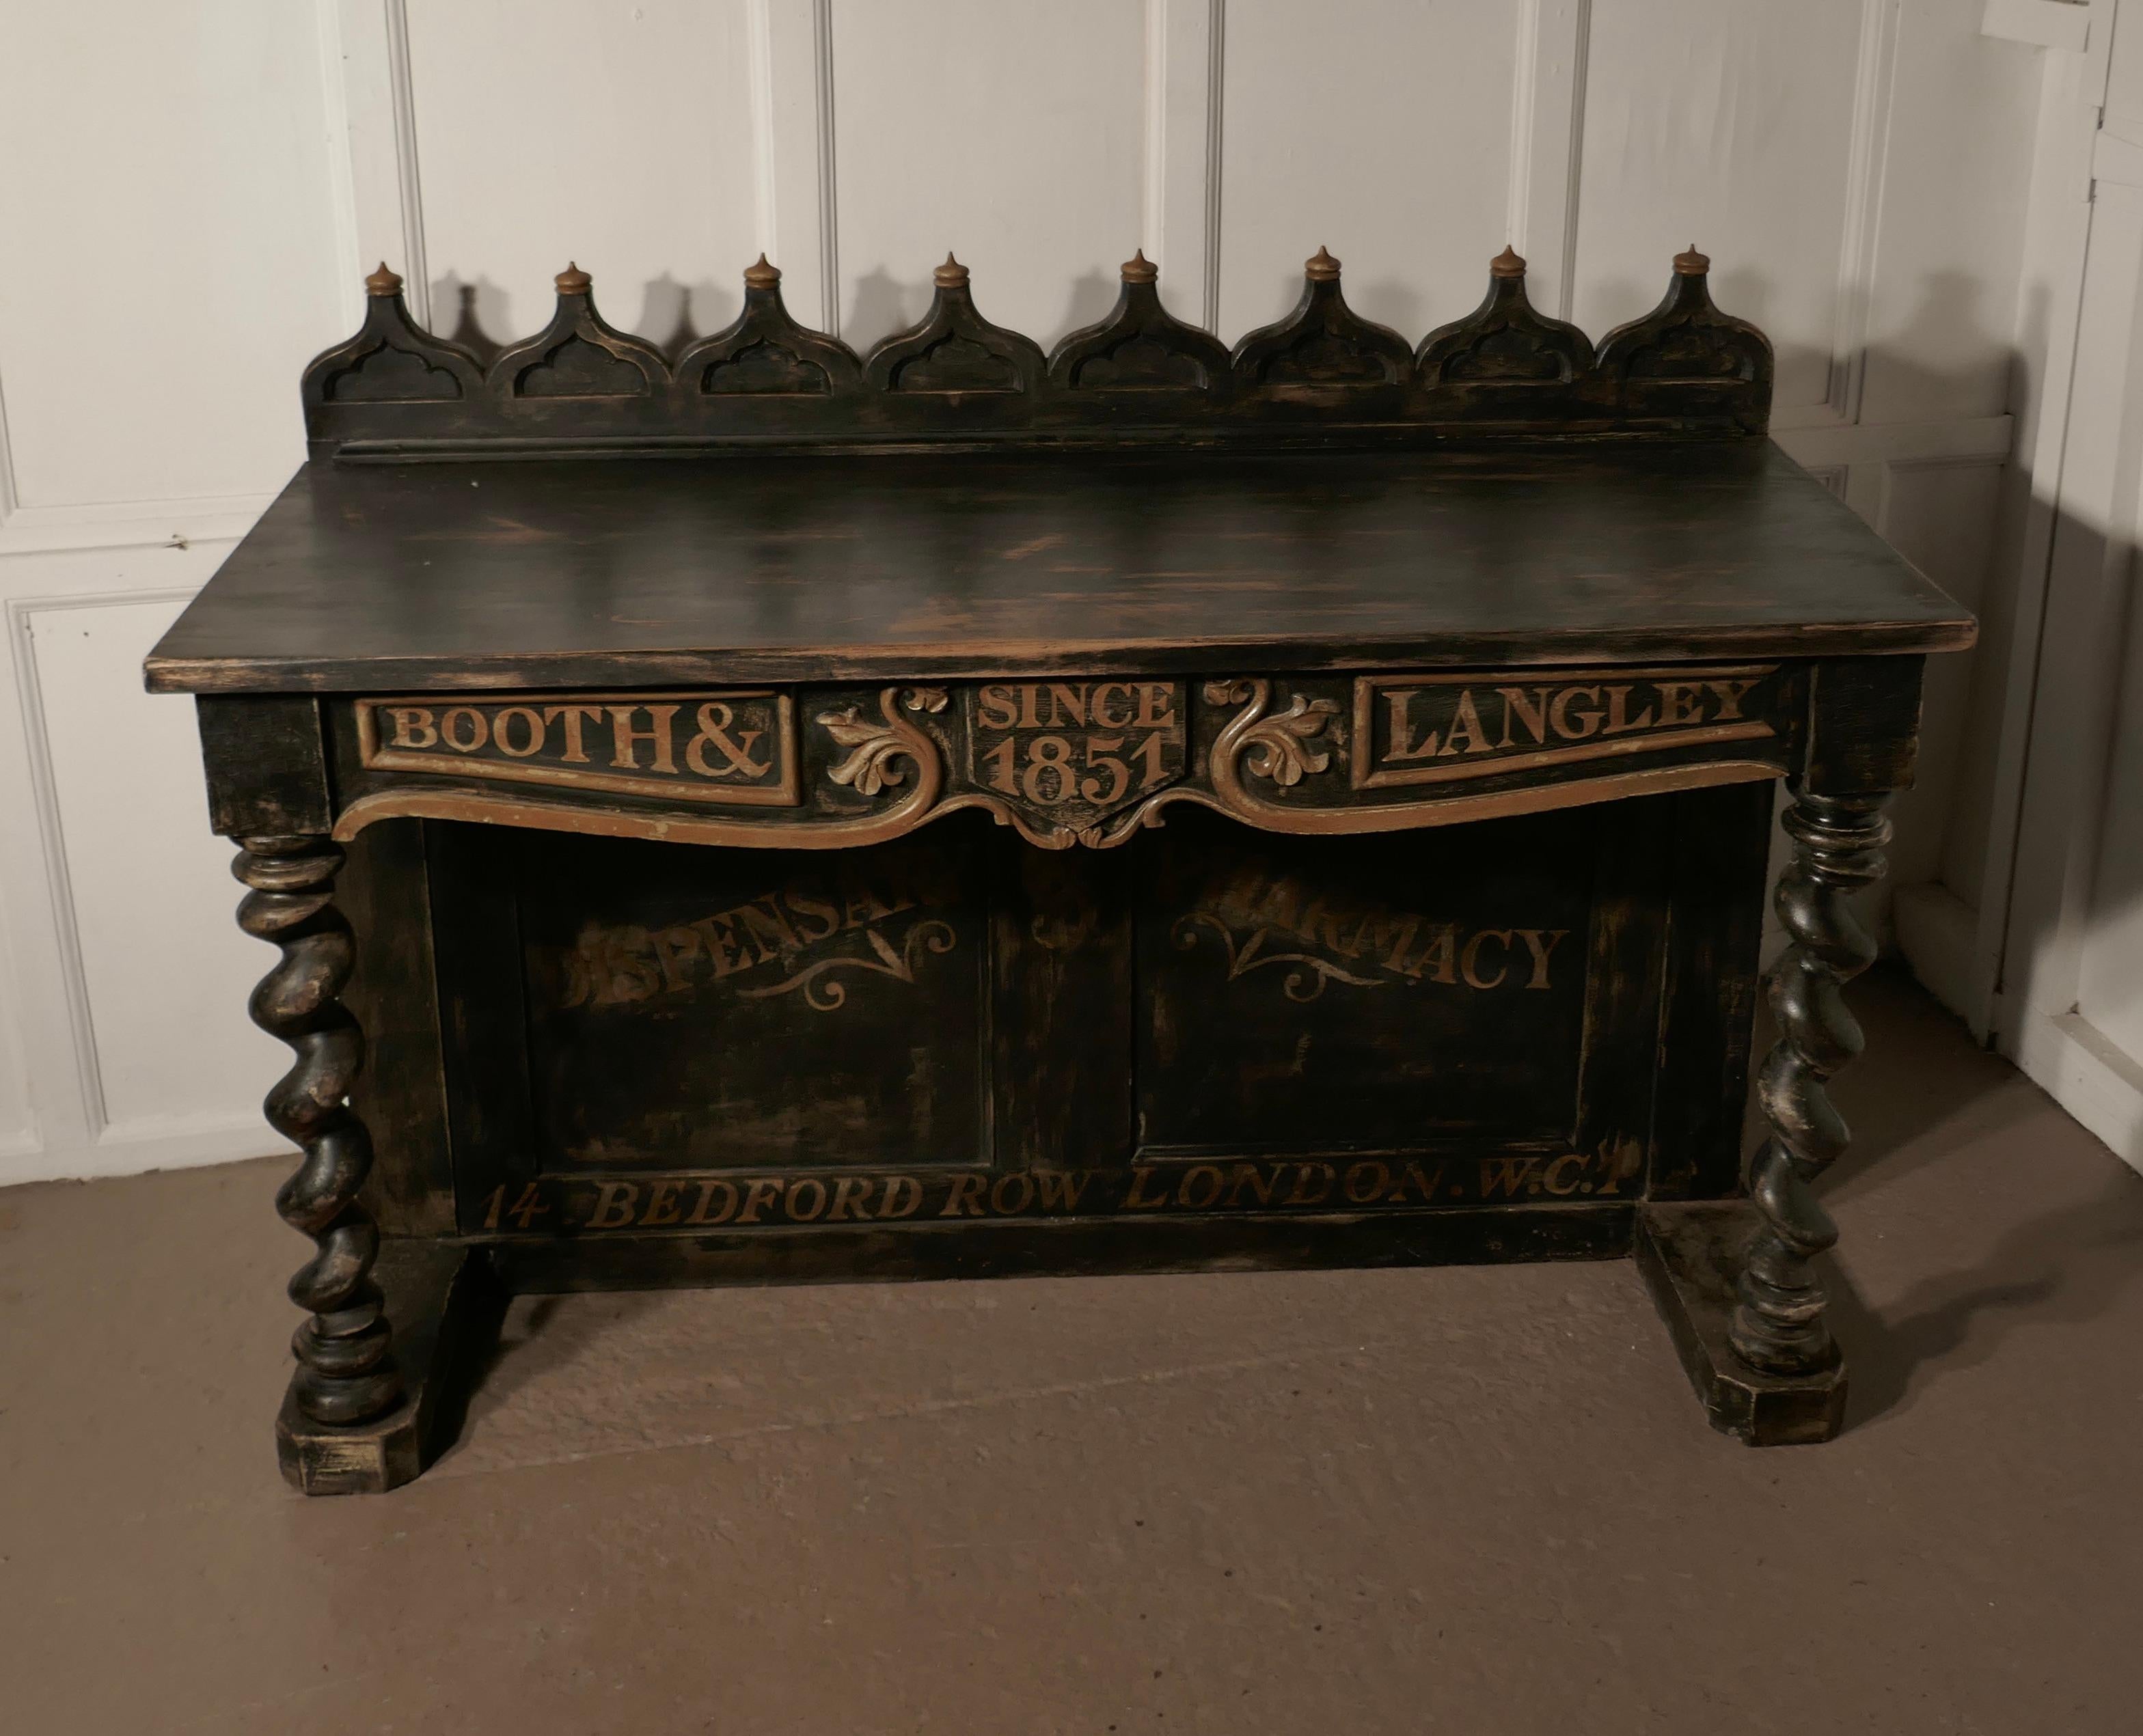 Booth and Langley Dispensing Pharmacy shop counter

This is a large black shop counter, it has a decorative back gallery with chunky barley twist turned columns to the front

The dresser is distressed but sturdy

It measures 60